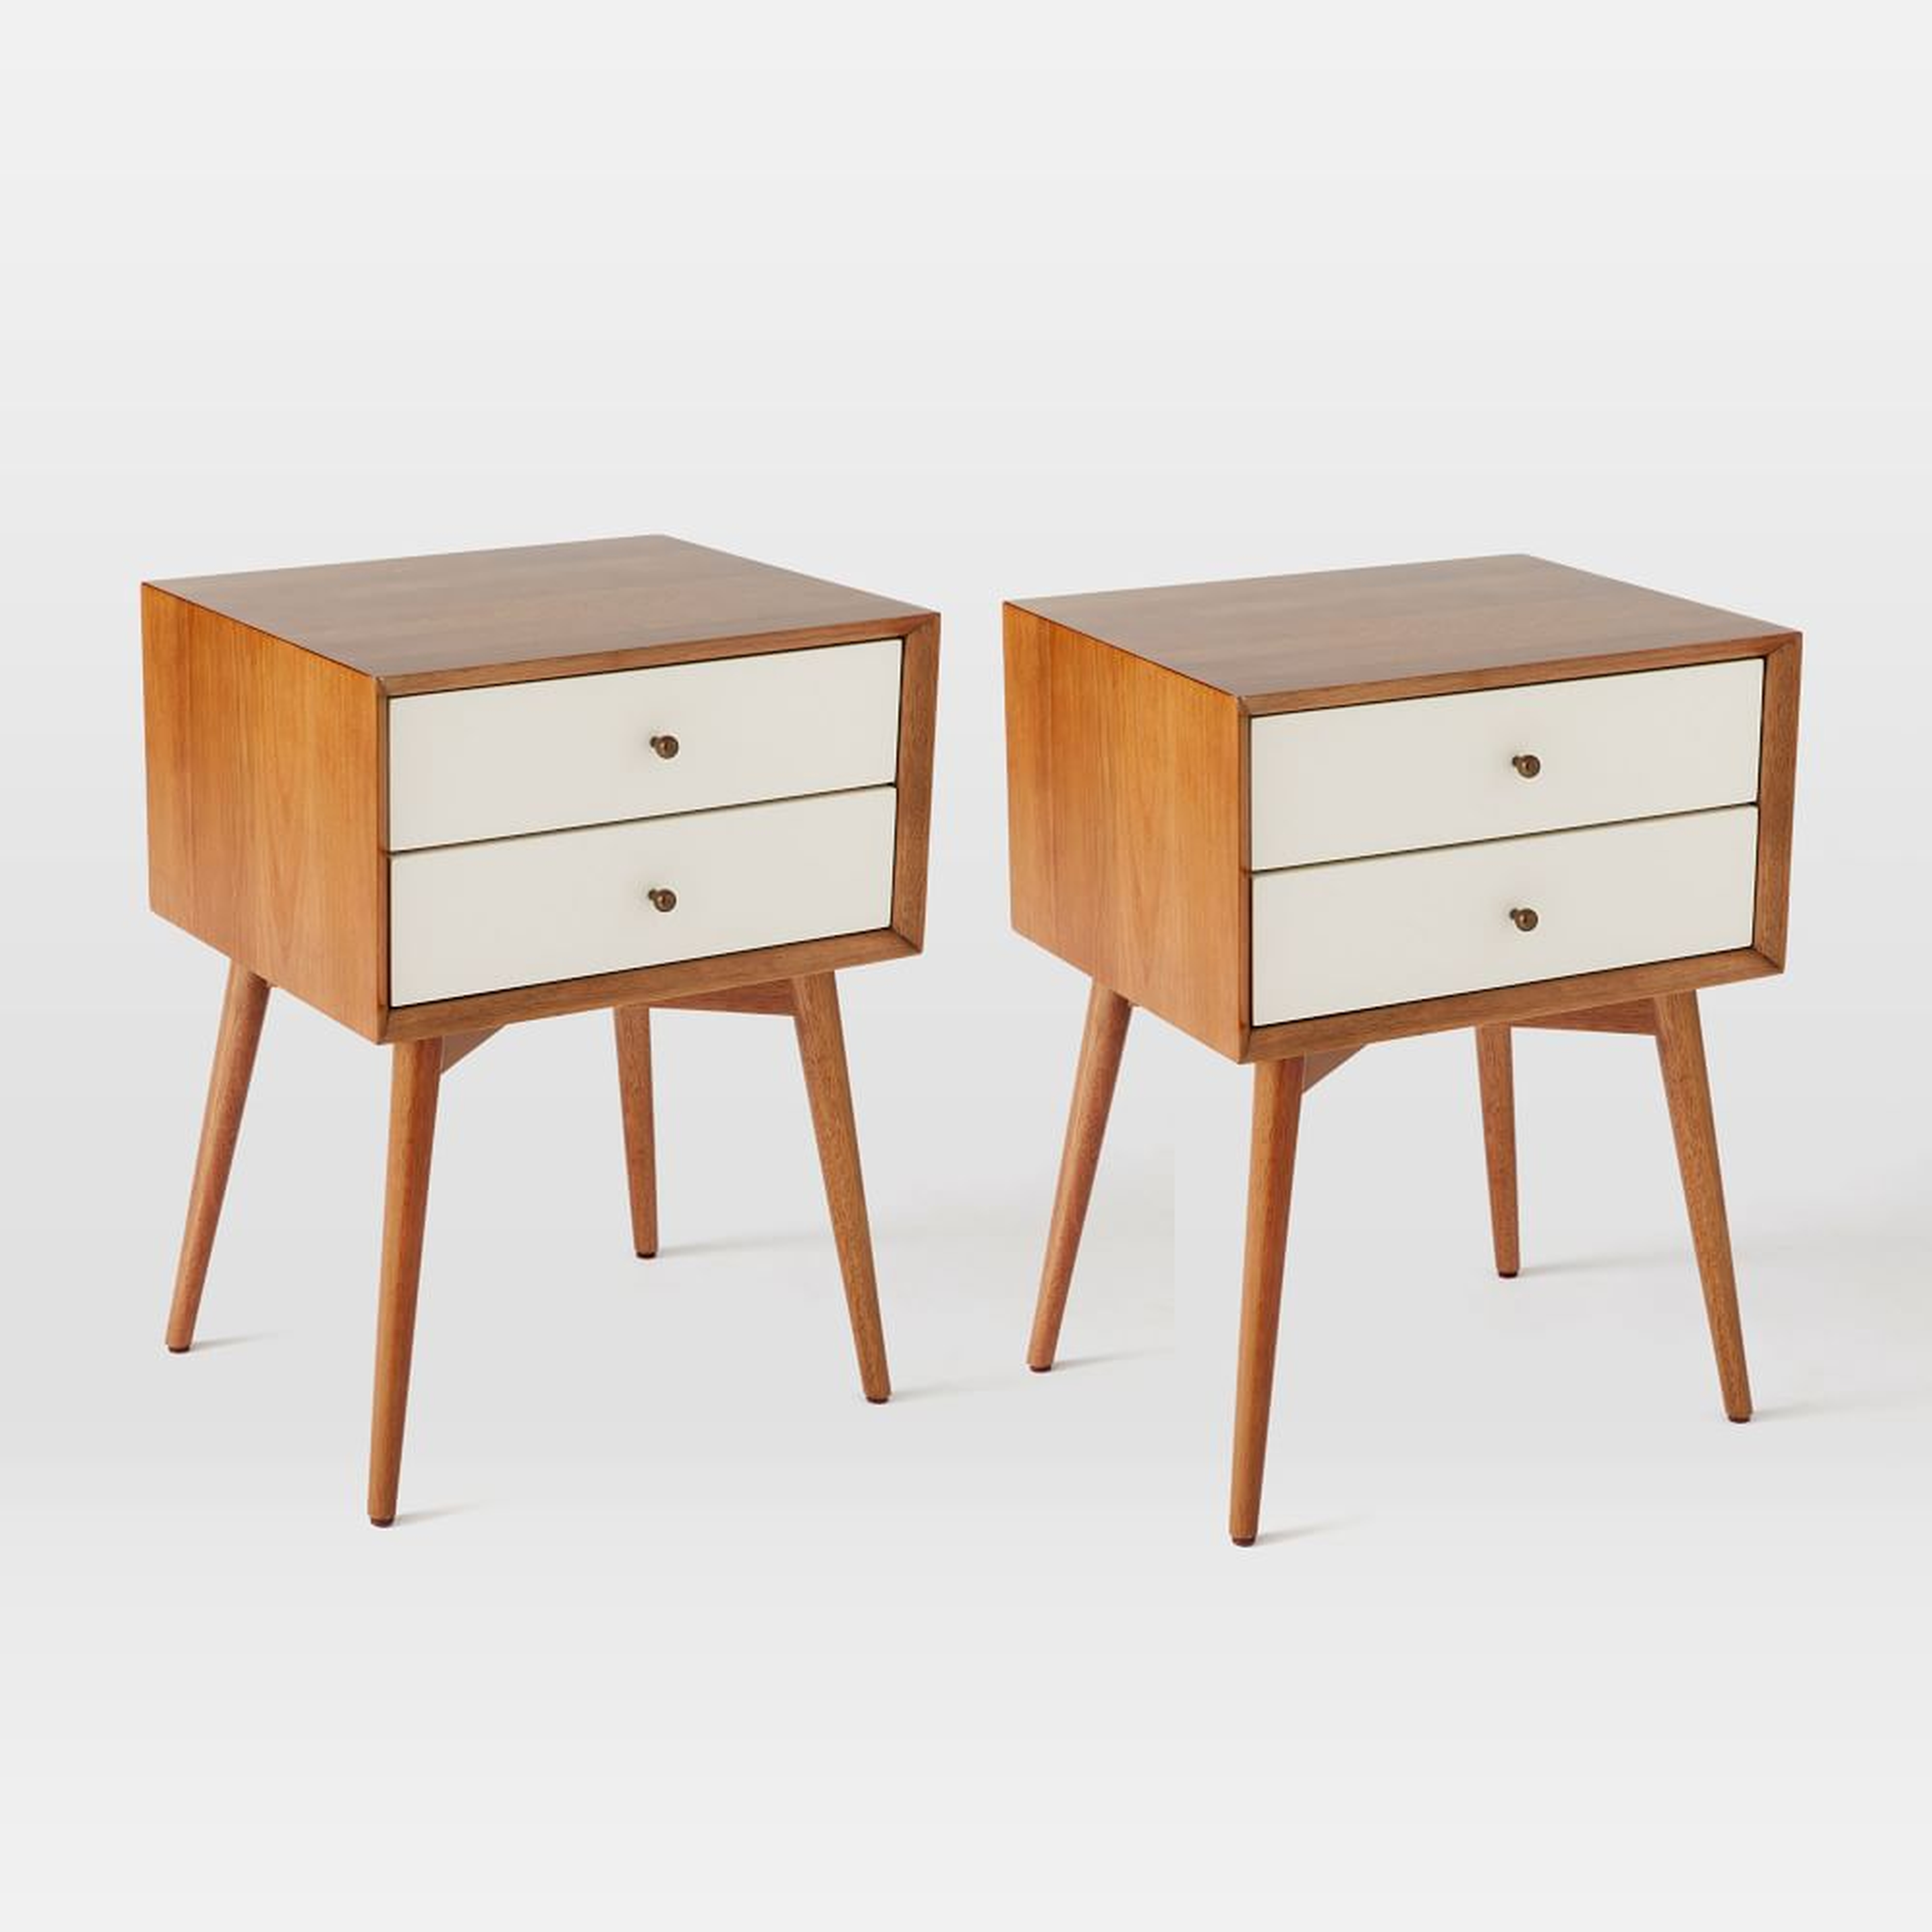 Mid-Century (17.5") Nightstand, White Lacquer/Acorn, Set of 2 - West Elm